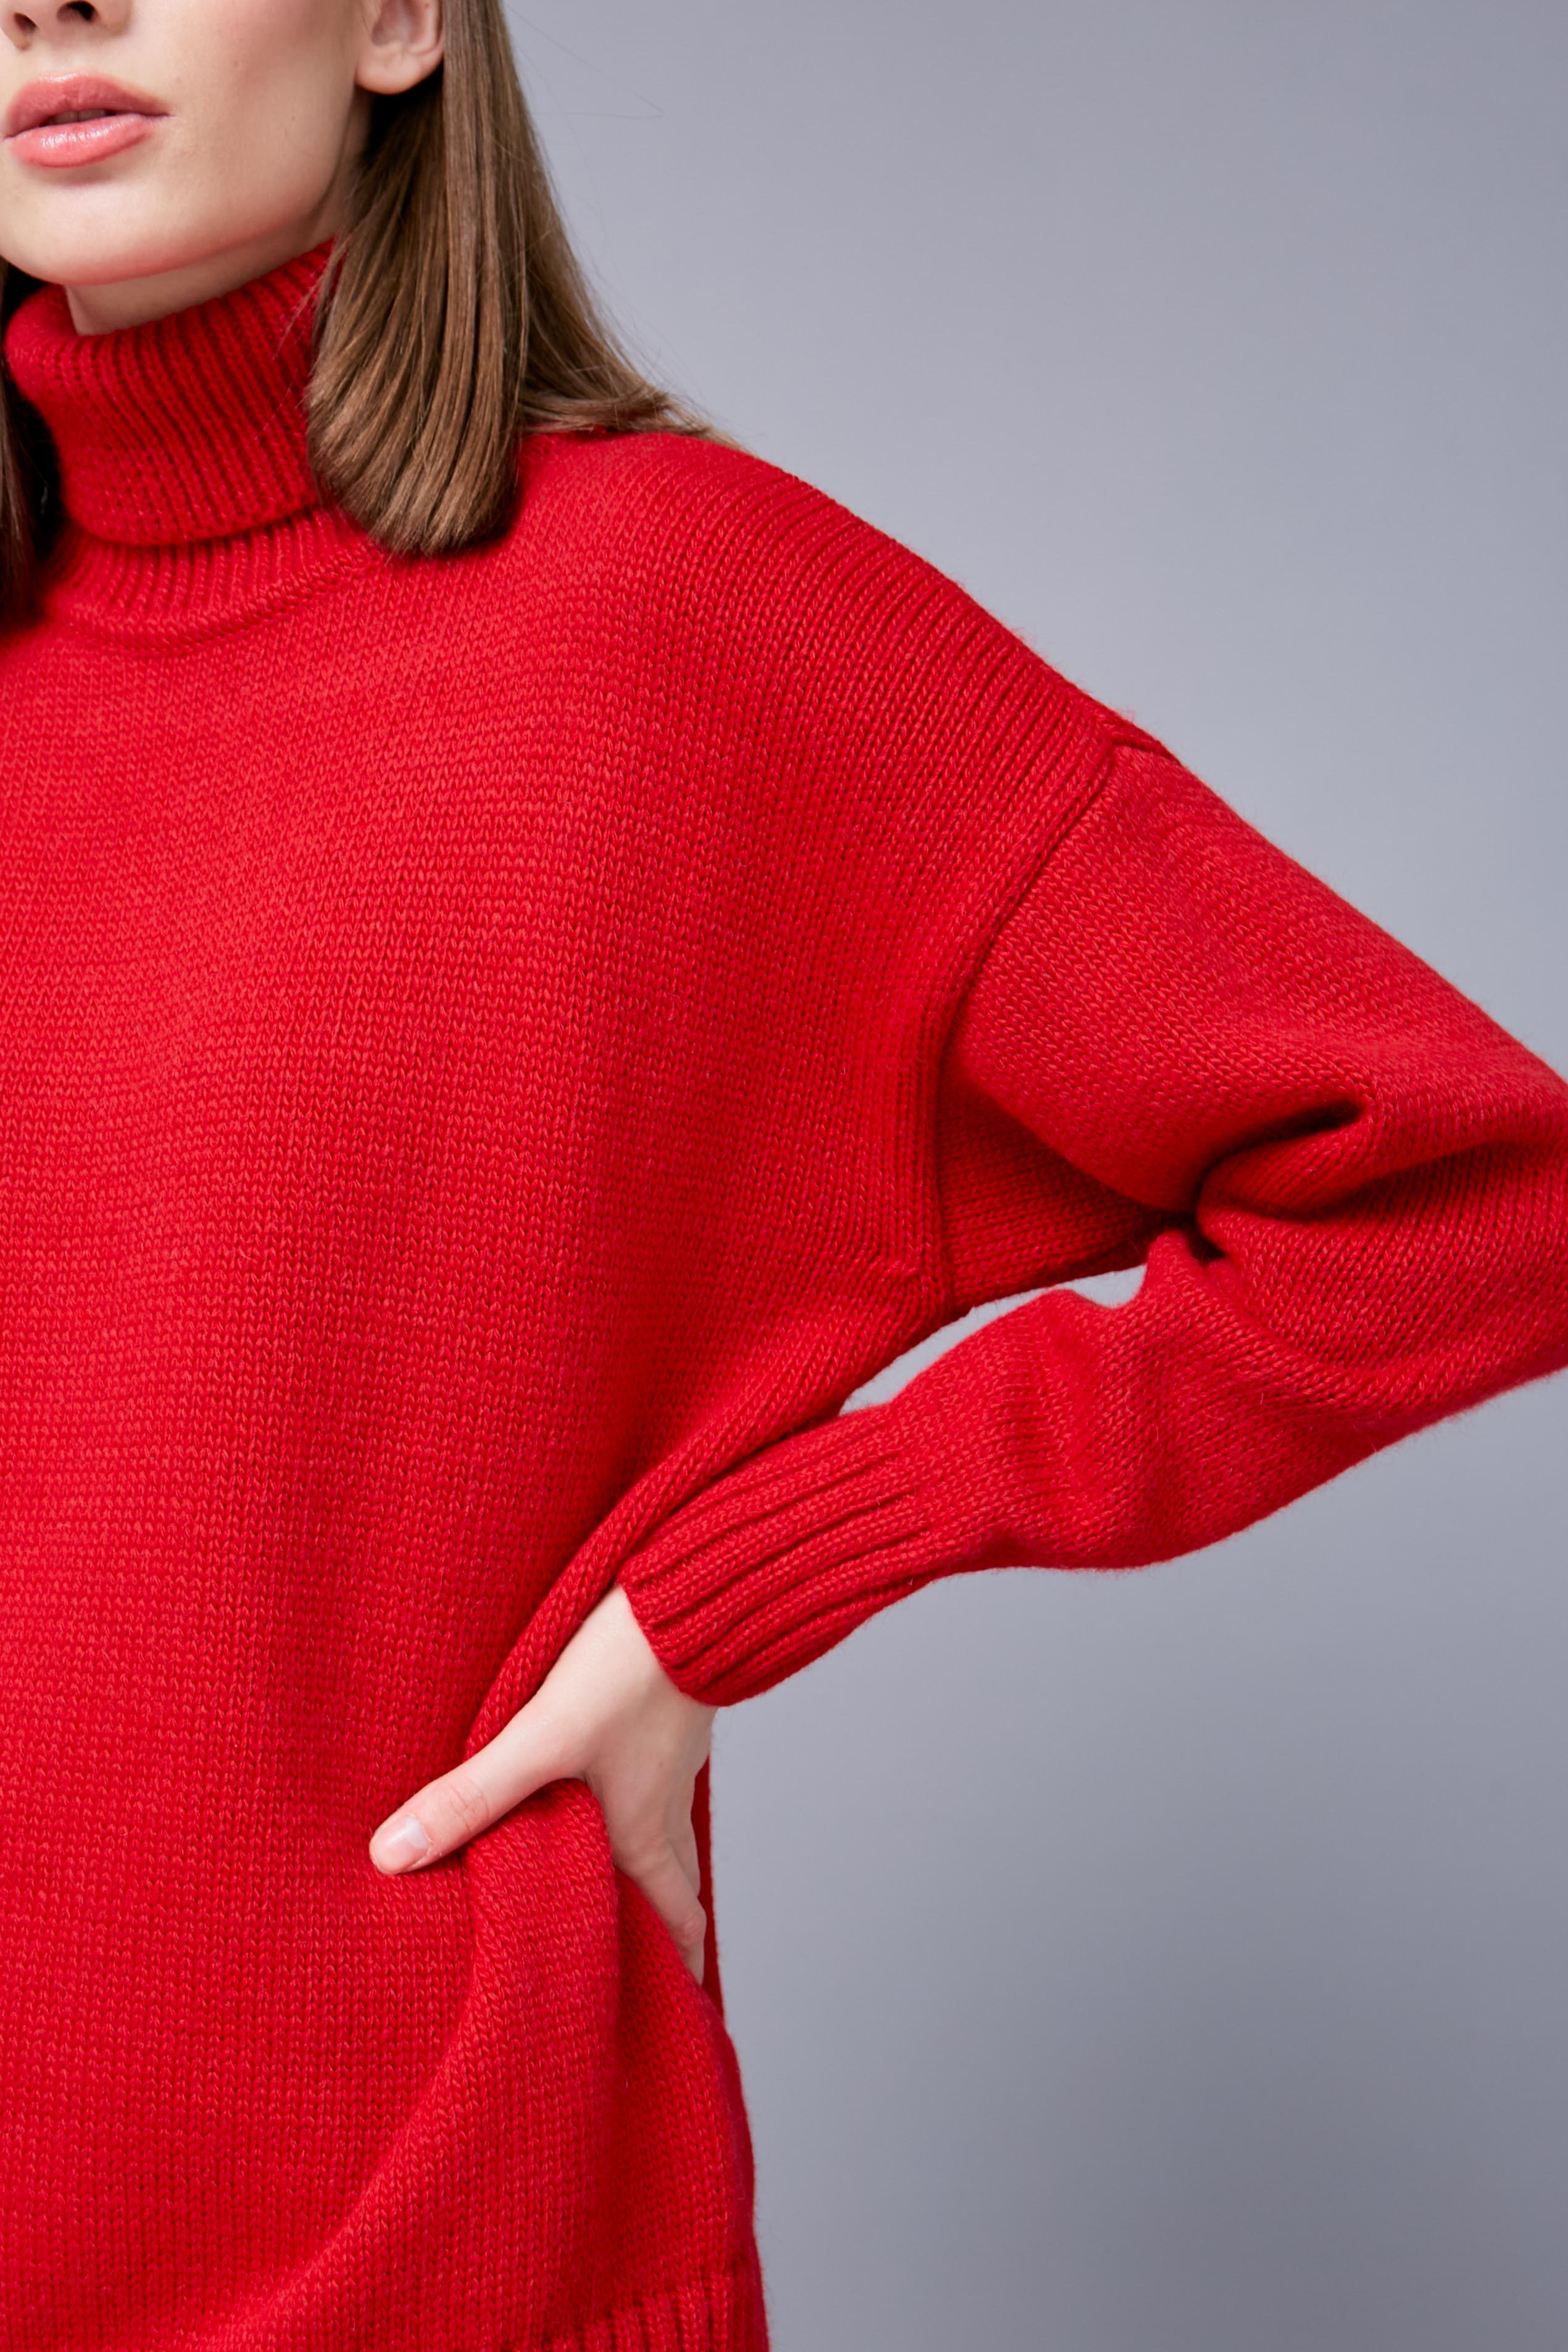 Red knit turtleneck sweater, photo 5